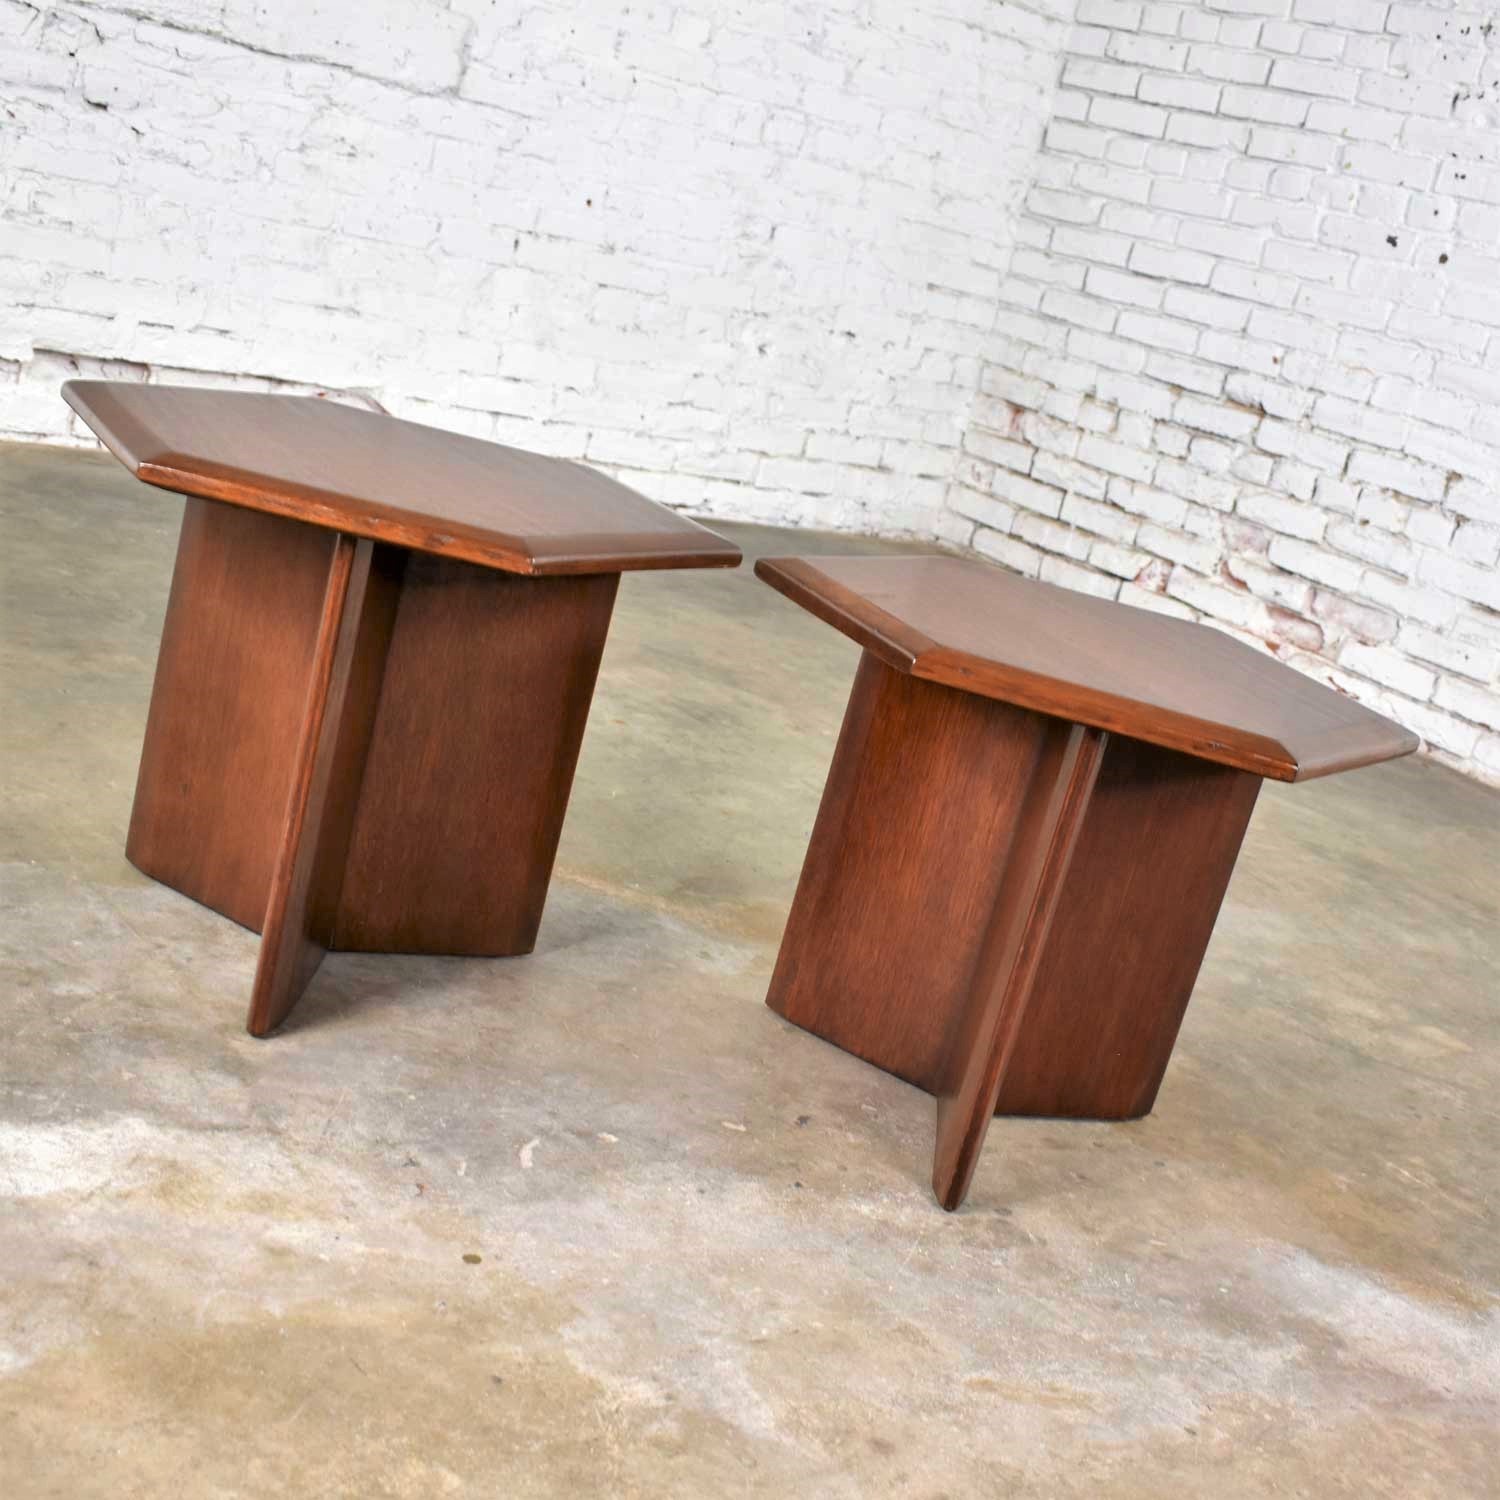 Pair Walnut Stained Hexagon Side Tables Style of Frank Lloyd Wright for Henredon